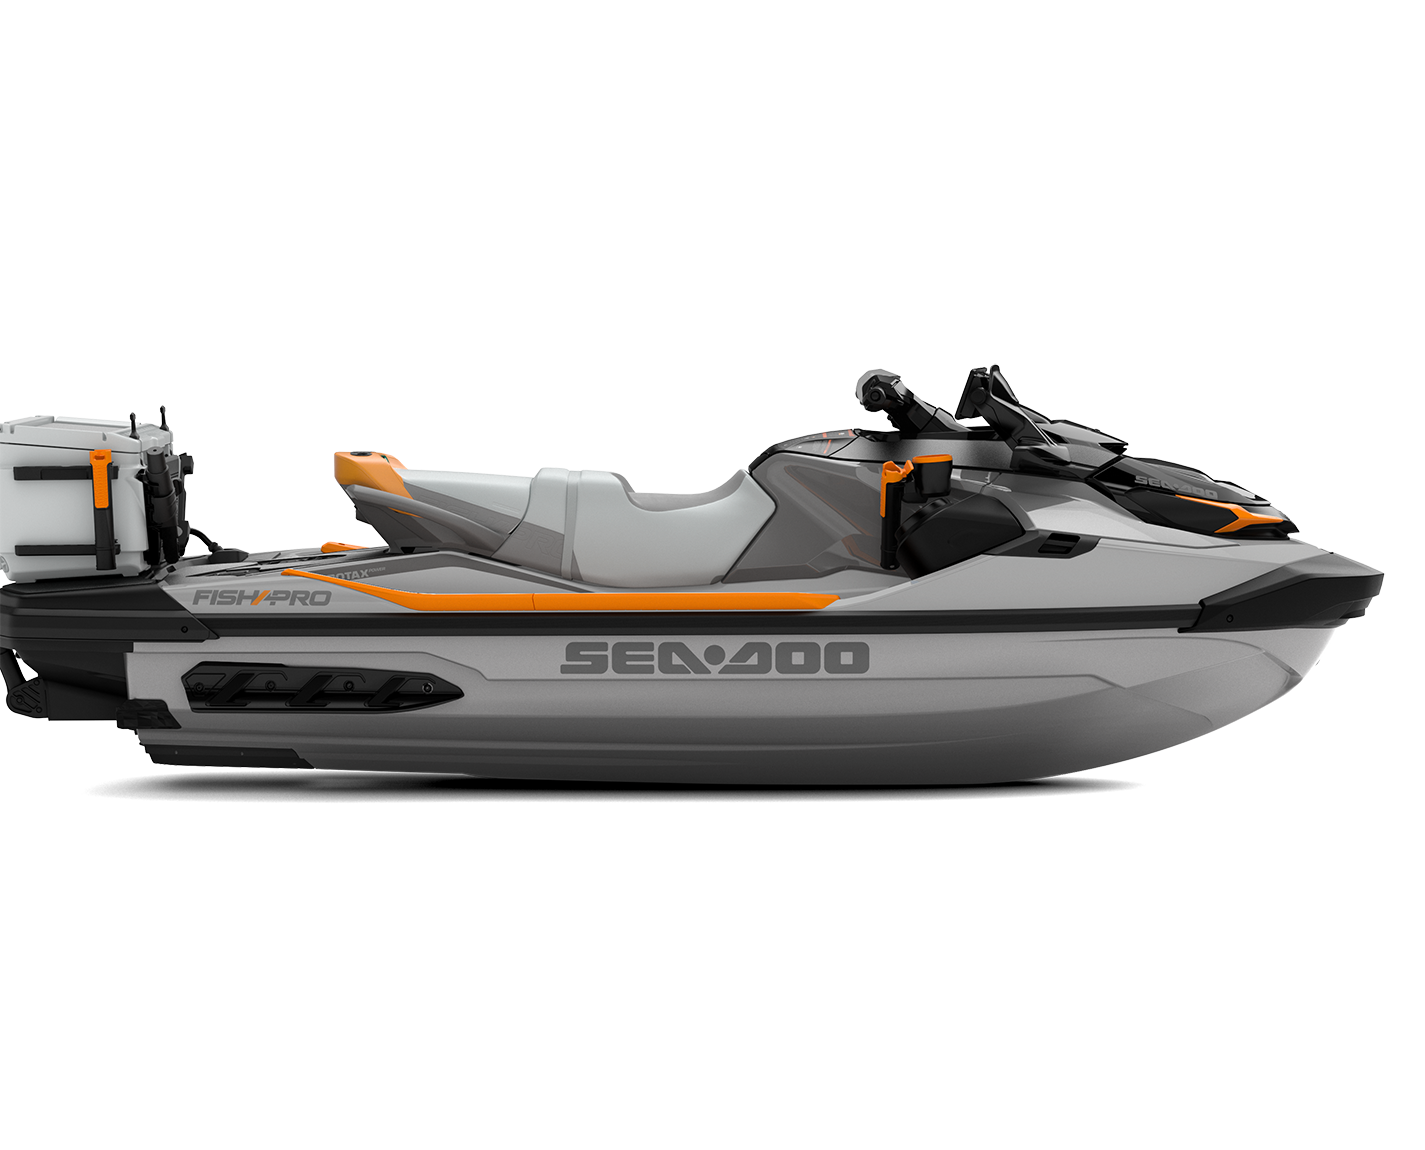 Sea-Doo FishPro Trophy 170 with sound system MY23 - Shark Grey / Orange Crush - Side view